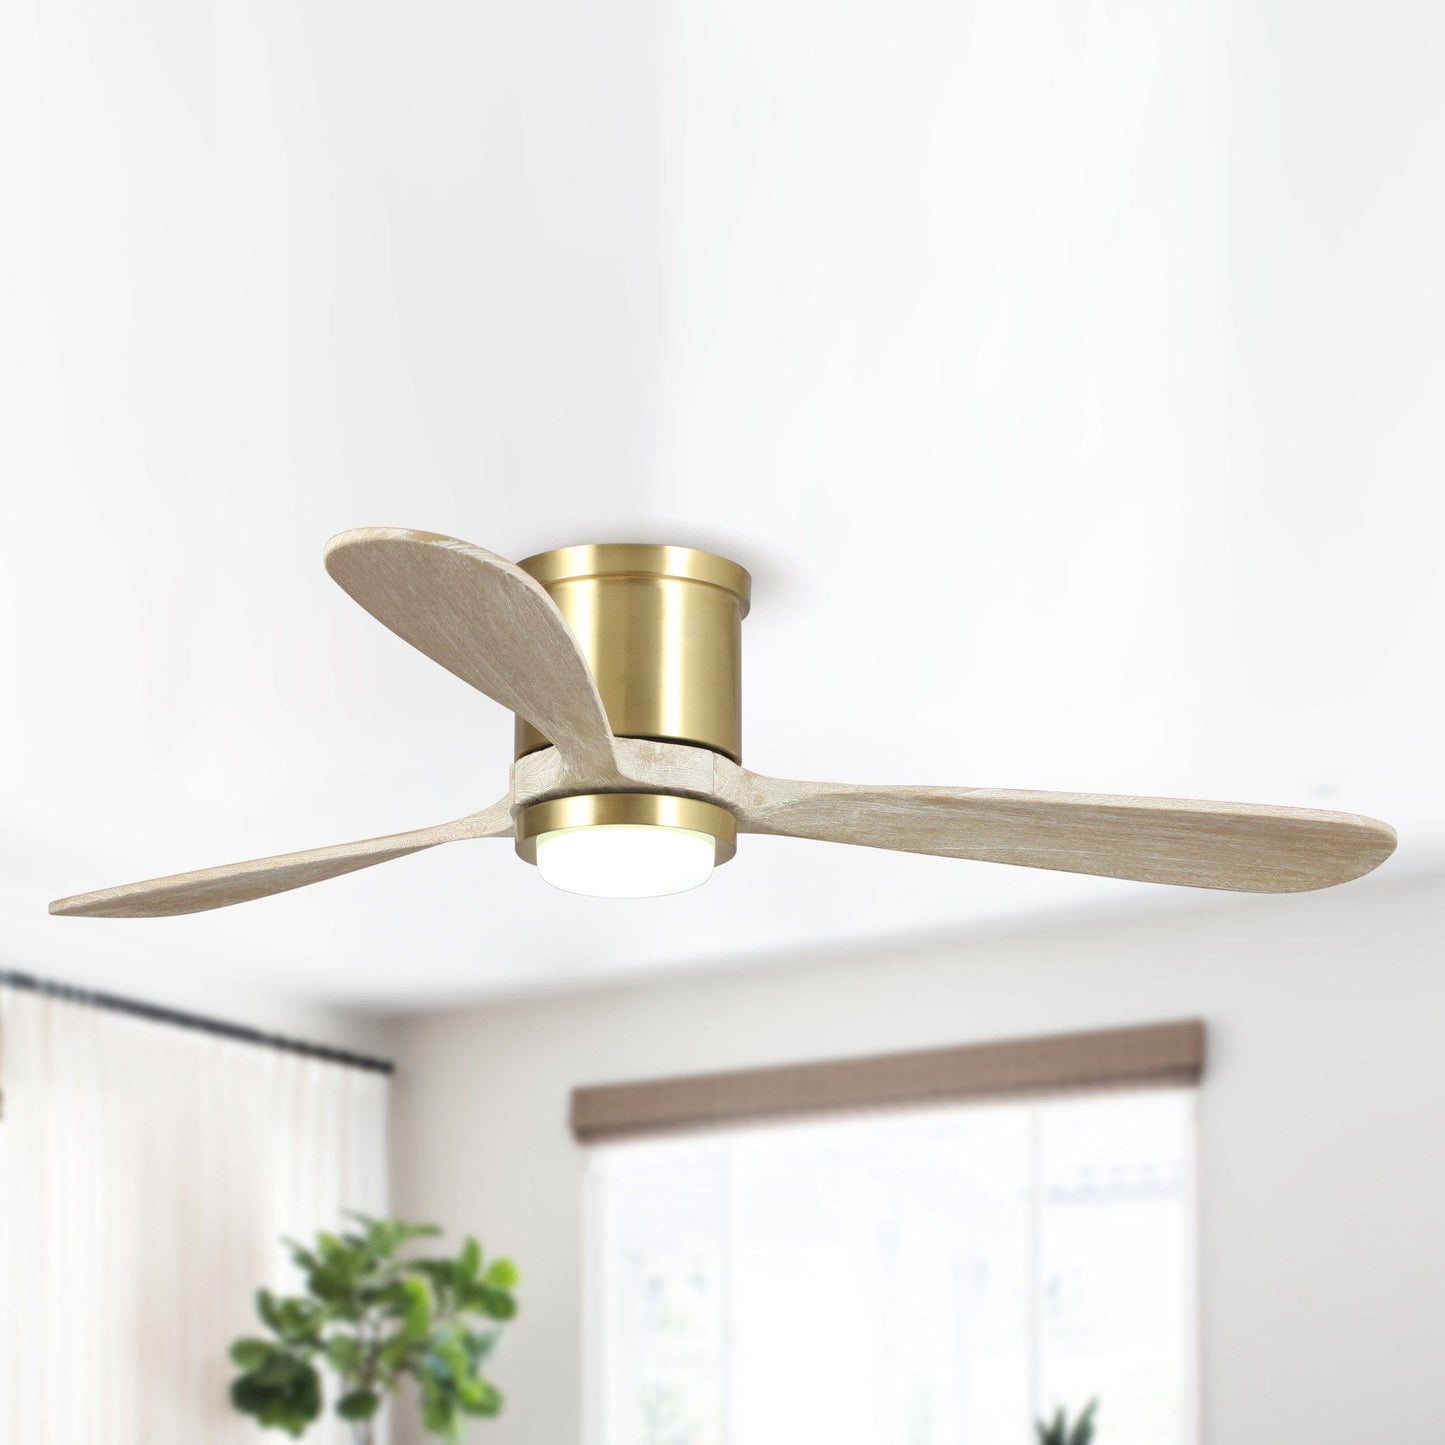 Parrot Uncle 52" Mayna Modern Flush Mount Reversible Ceiling Fan with LED Lighting and Remote Control